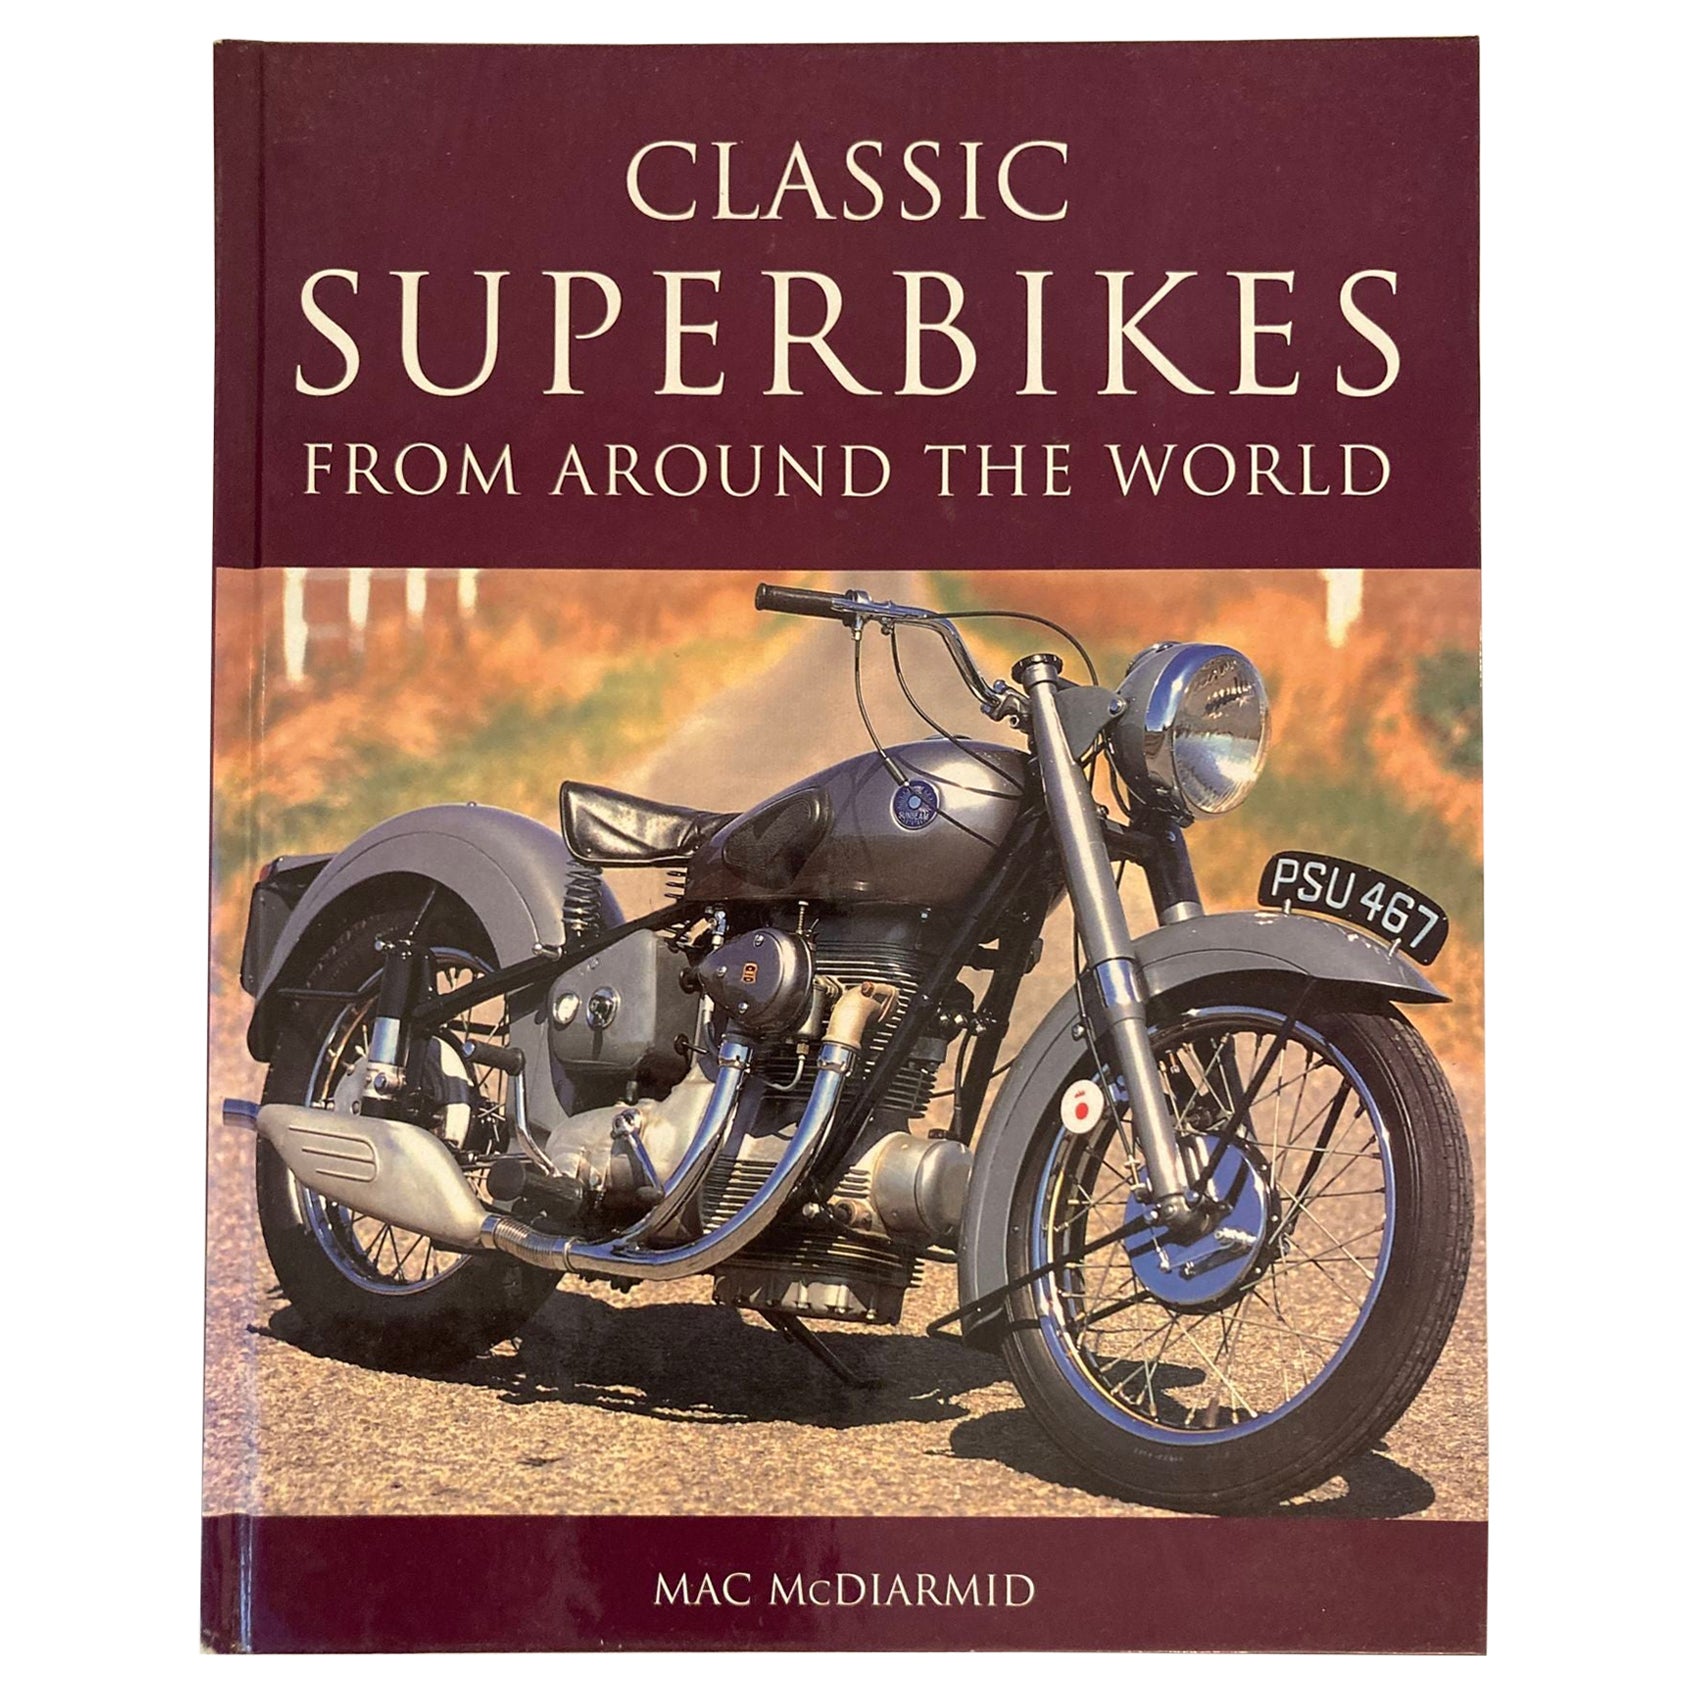 Classic Superbikes from Around the World Coffee Table Book Hardcover 2003 For Sale